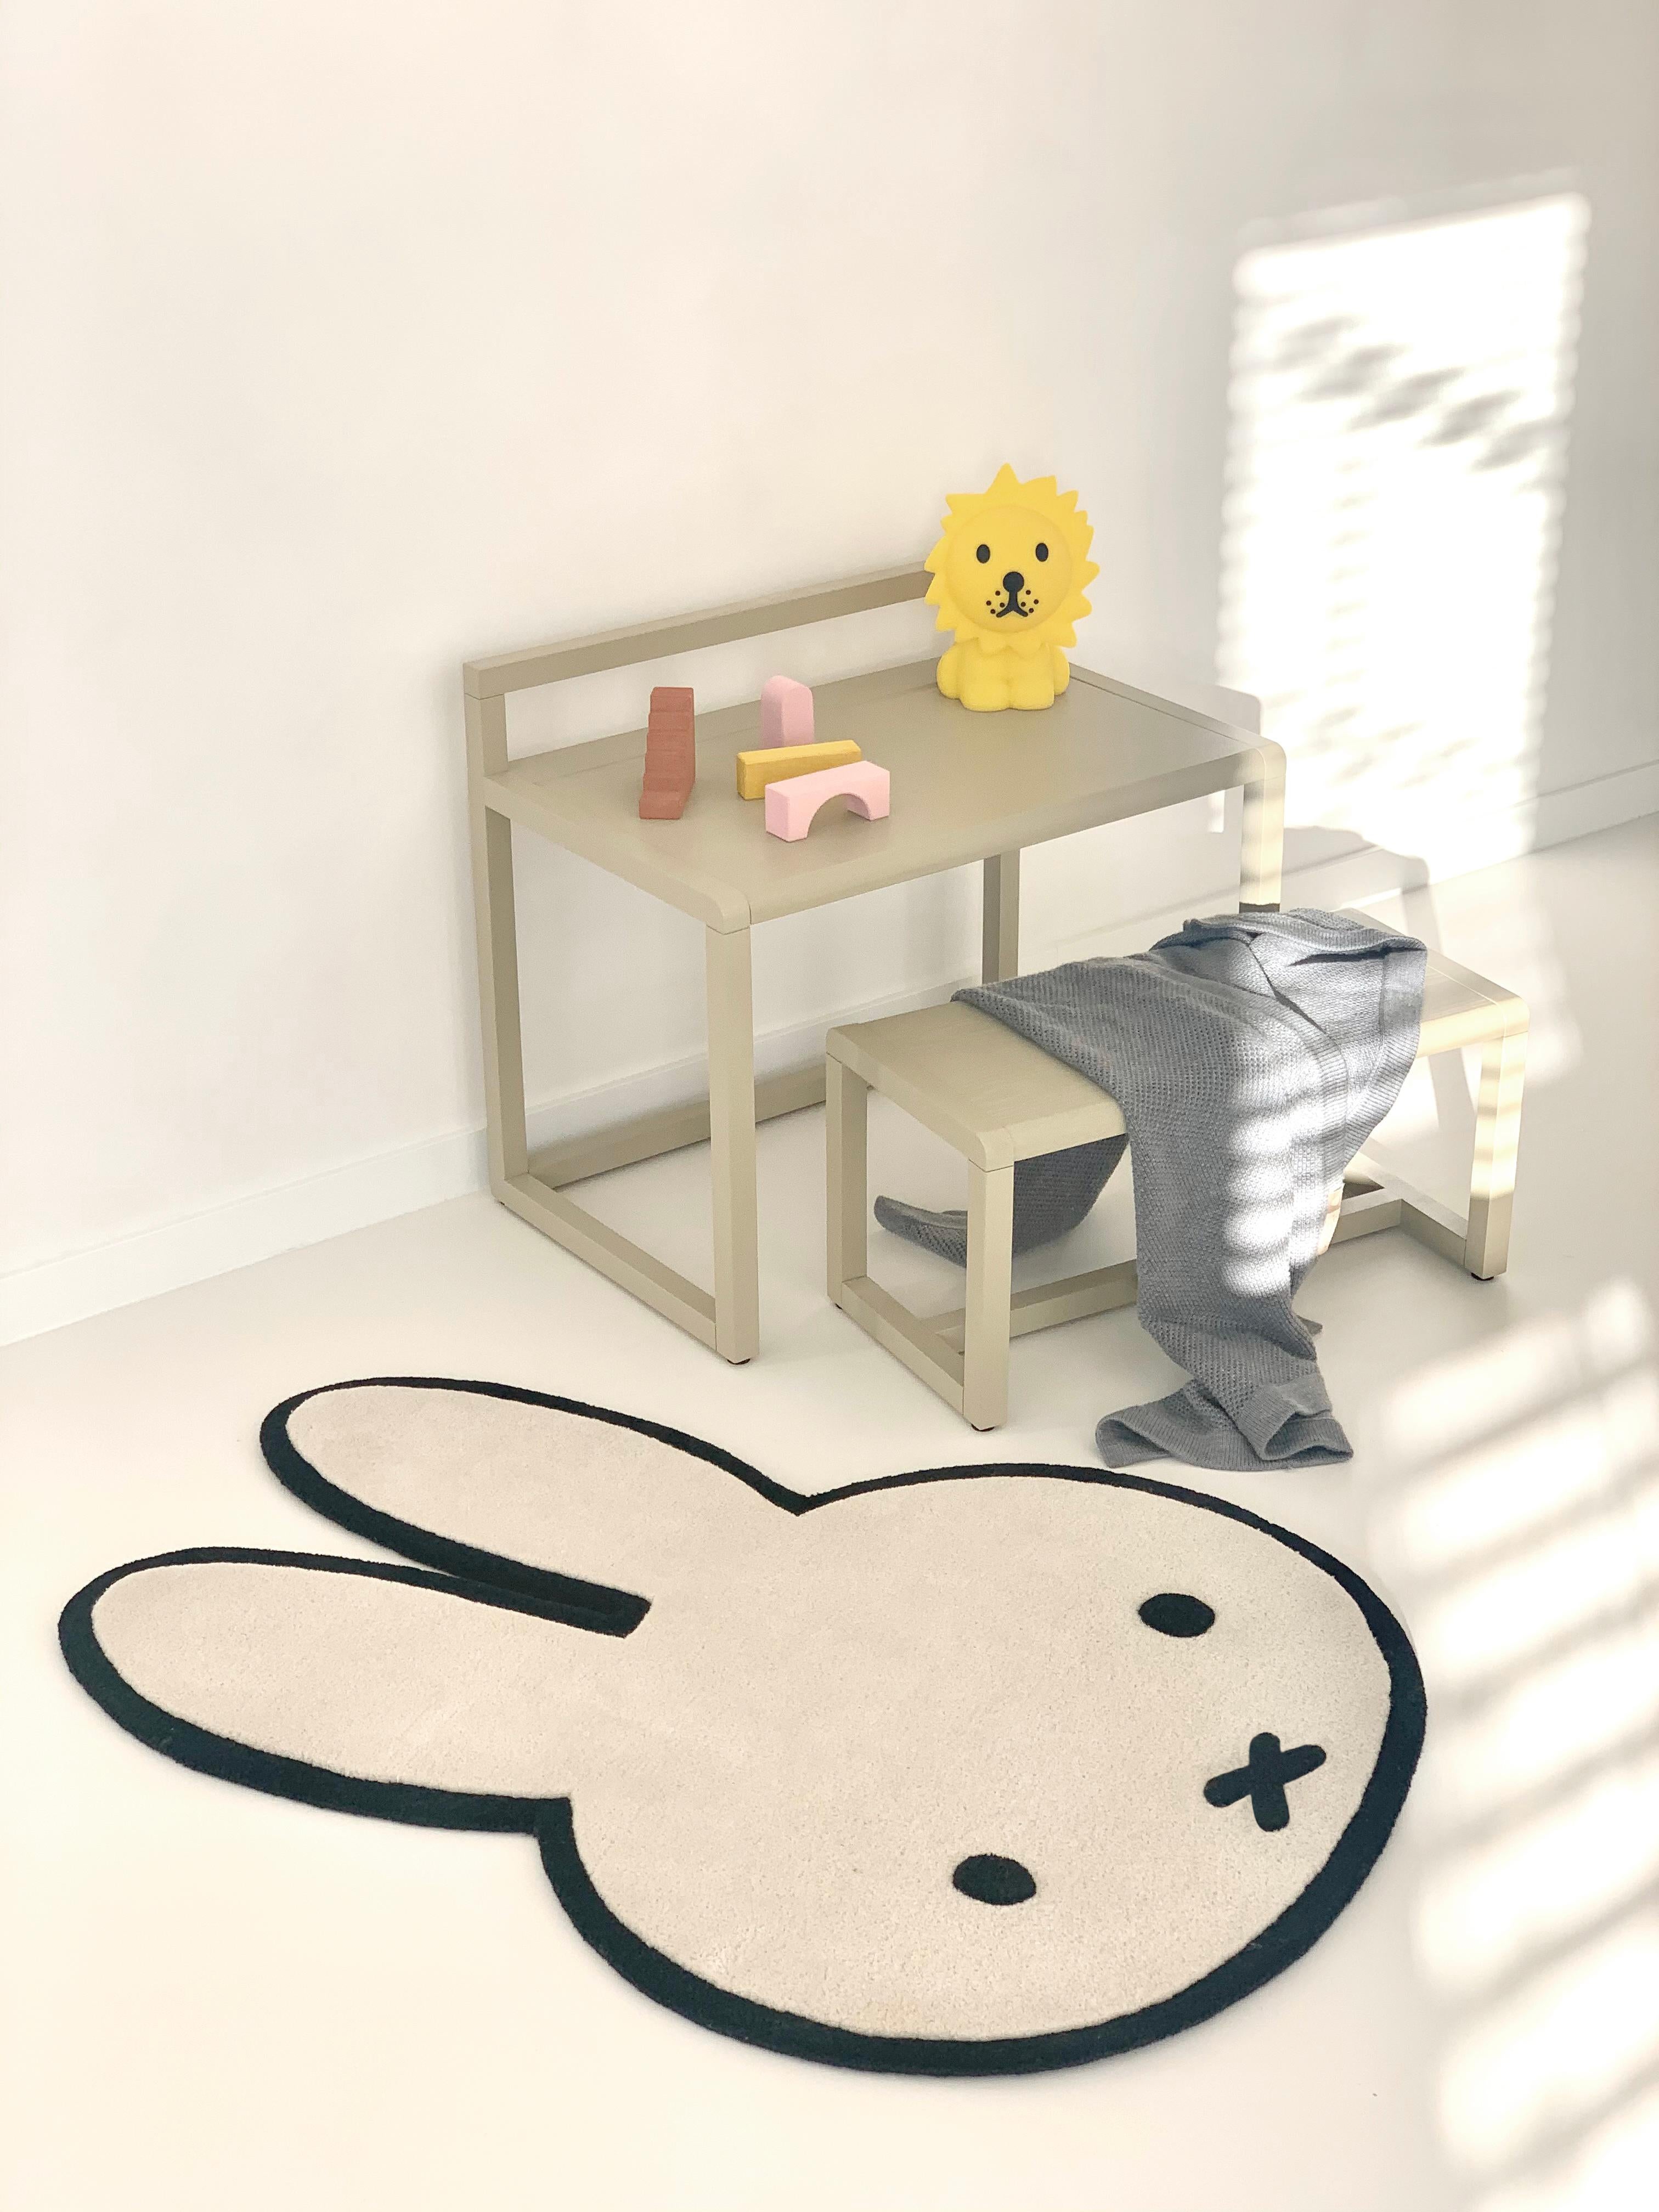 Decorate your kid’s bedroom with miffy, world’s most famous bunny. The miffy rug is hand-tufted from 100% New Zealand wool. A super soft cuddly rug that fits any type of children’s room. The cute and iconic face is made in a higher pile so it lays